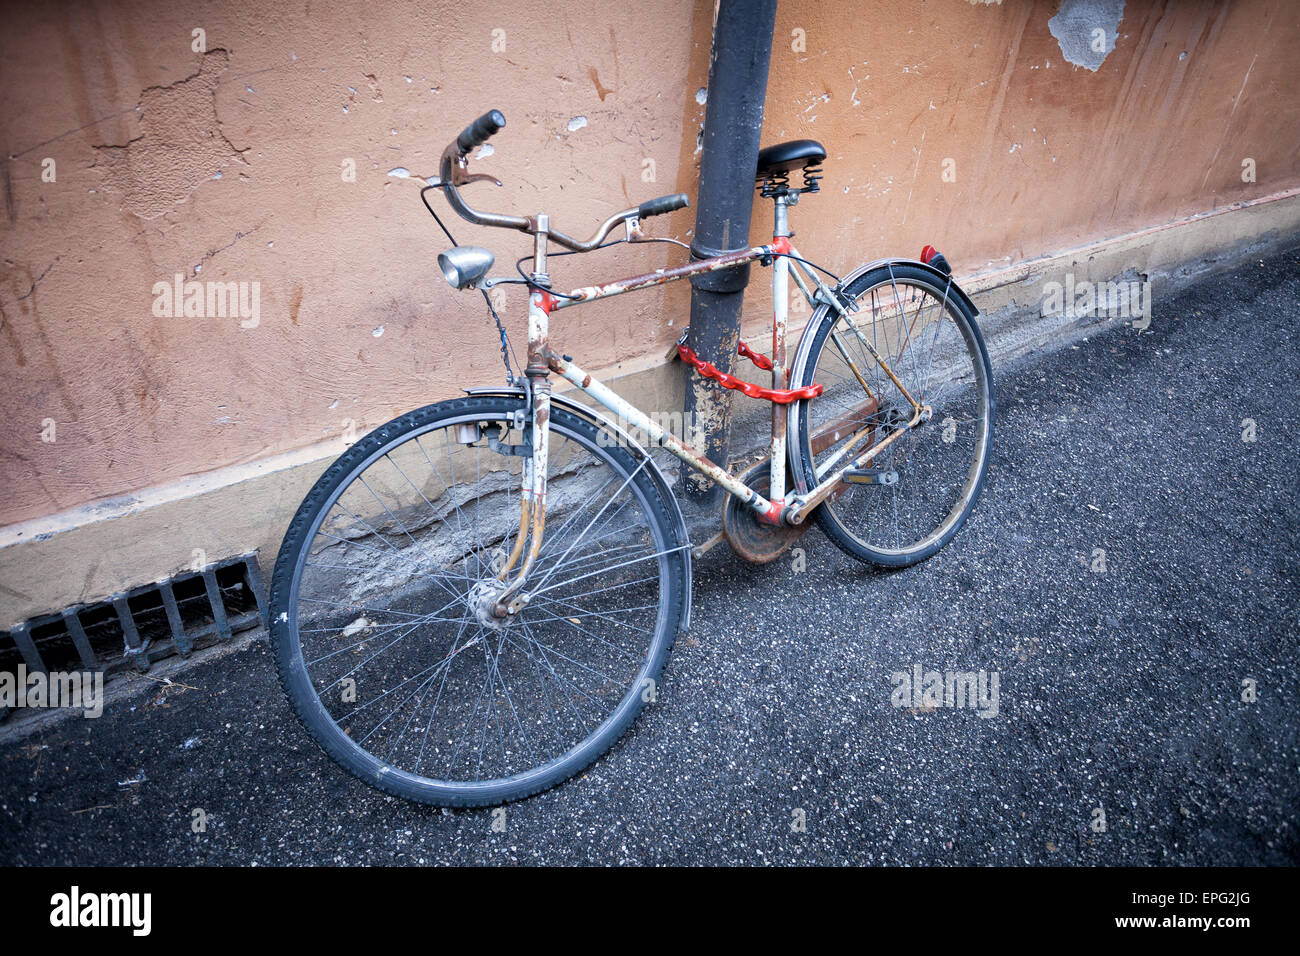 old rusty vintage bicycle near the concrete wall Stock Photo